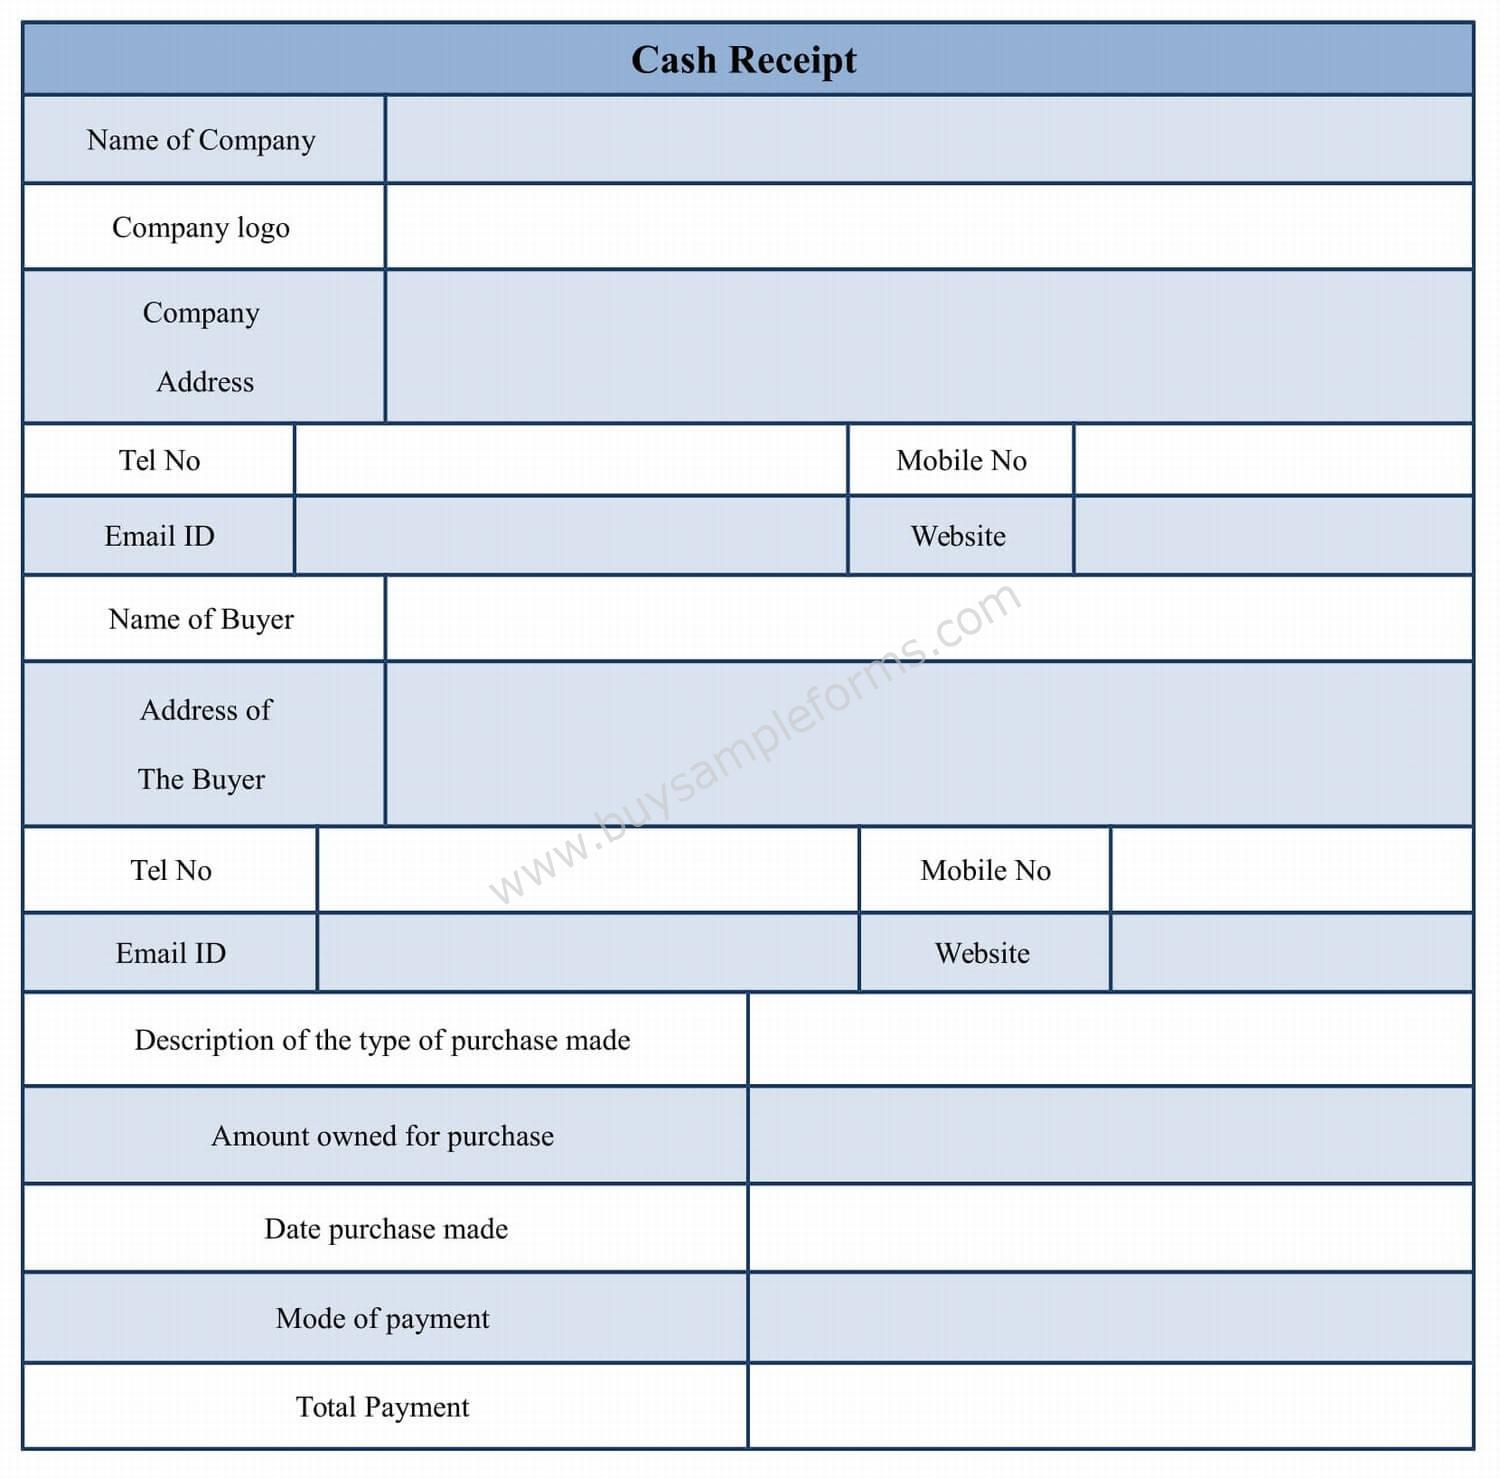 cash-receipt-form-template-for-word